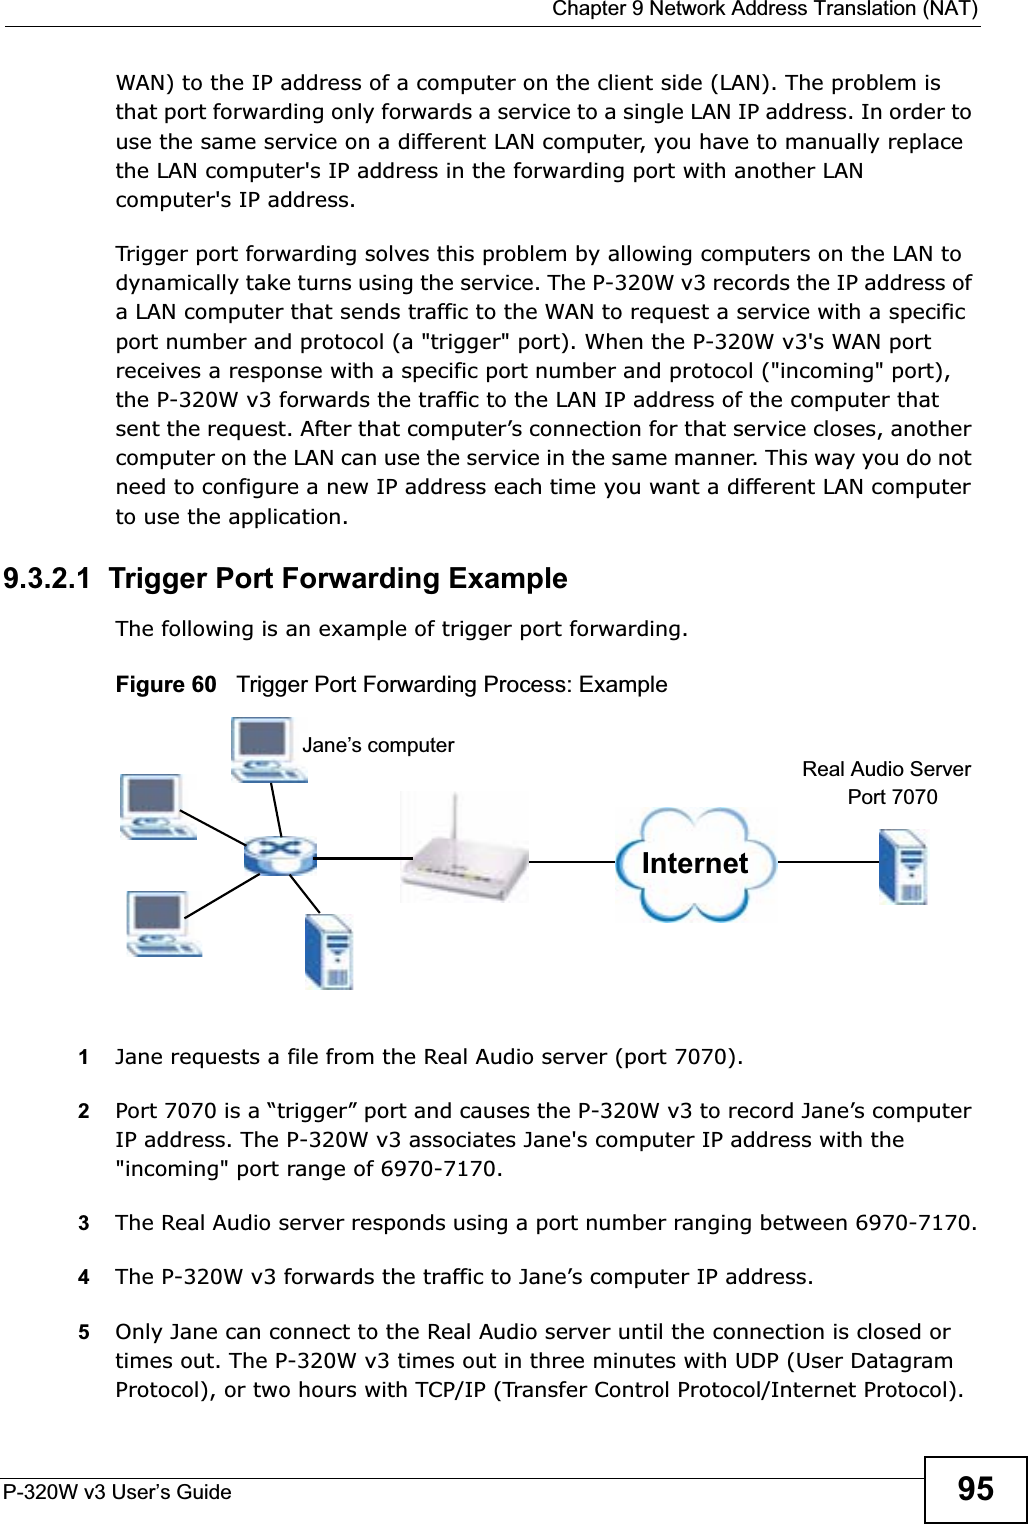  Chapter 9 Network Address Translation (NAT)P-320W v3 User’s Guide 95WAN) to the IP address of a computer on the client side (LAN). The problem is that port forwarding only forwards a service to a single LAN IP address. In order to use the same service on a different LAN computer, you have to manually replace the LAN computer&apos;s IP address in the forwarding port with another LAN computer&apos;s IP address. Trigger port forwarding solves this problem by allowing computers on the LAN to dynamically take turns using the service. The P-320W v3 records the IP address of a LAN computer that sends traffic to the WAN to request a service with a specific port number and protocol (a &quot;trigger&quot; port). When the P-320W v3&apos;s WAN port receives a response with a specific port number and protocol (&quot;incoming&quot; port), the P-320W v3 forwards the traffic to the LAN IP address of the computer that sent the request. After that computer’s connection for that service closes, another computer on the LAN can use the service in the same manner. This way you do not need to configure a new IP address each time you want a different LAN computer to use the application.9.3.2.1  Trigger Port Forwarding Example The following is an example of trigger port forwarding.Figure 60   Trigger Port Forwarding Process: Example1Jane requests a file from the Real Audio server (port 7070).2Port 7070 is a “trigger” port and causes the P-320W v3 to record Jane’s computer IP address. The P-320W v3 associates Jane&apos;s computer IP address with the &quot;incoming&quot; port range of 6970-7170.3The Real Audio server responds using a port number ranging between 6970-7170.4The P-320W v3 forwards the traffic to Jane’s computer IP address. 5Only Jane can connect to the Real Audio server until the connection is closed or times out. The P-320W v3 times out in three minutes with UDP (User Datagram Protocol), or two hours with TCP/IP (Transfer Control Protocol/Internet Protocol). InternetJane’s computerReal Audio ServerPort 7070